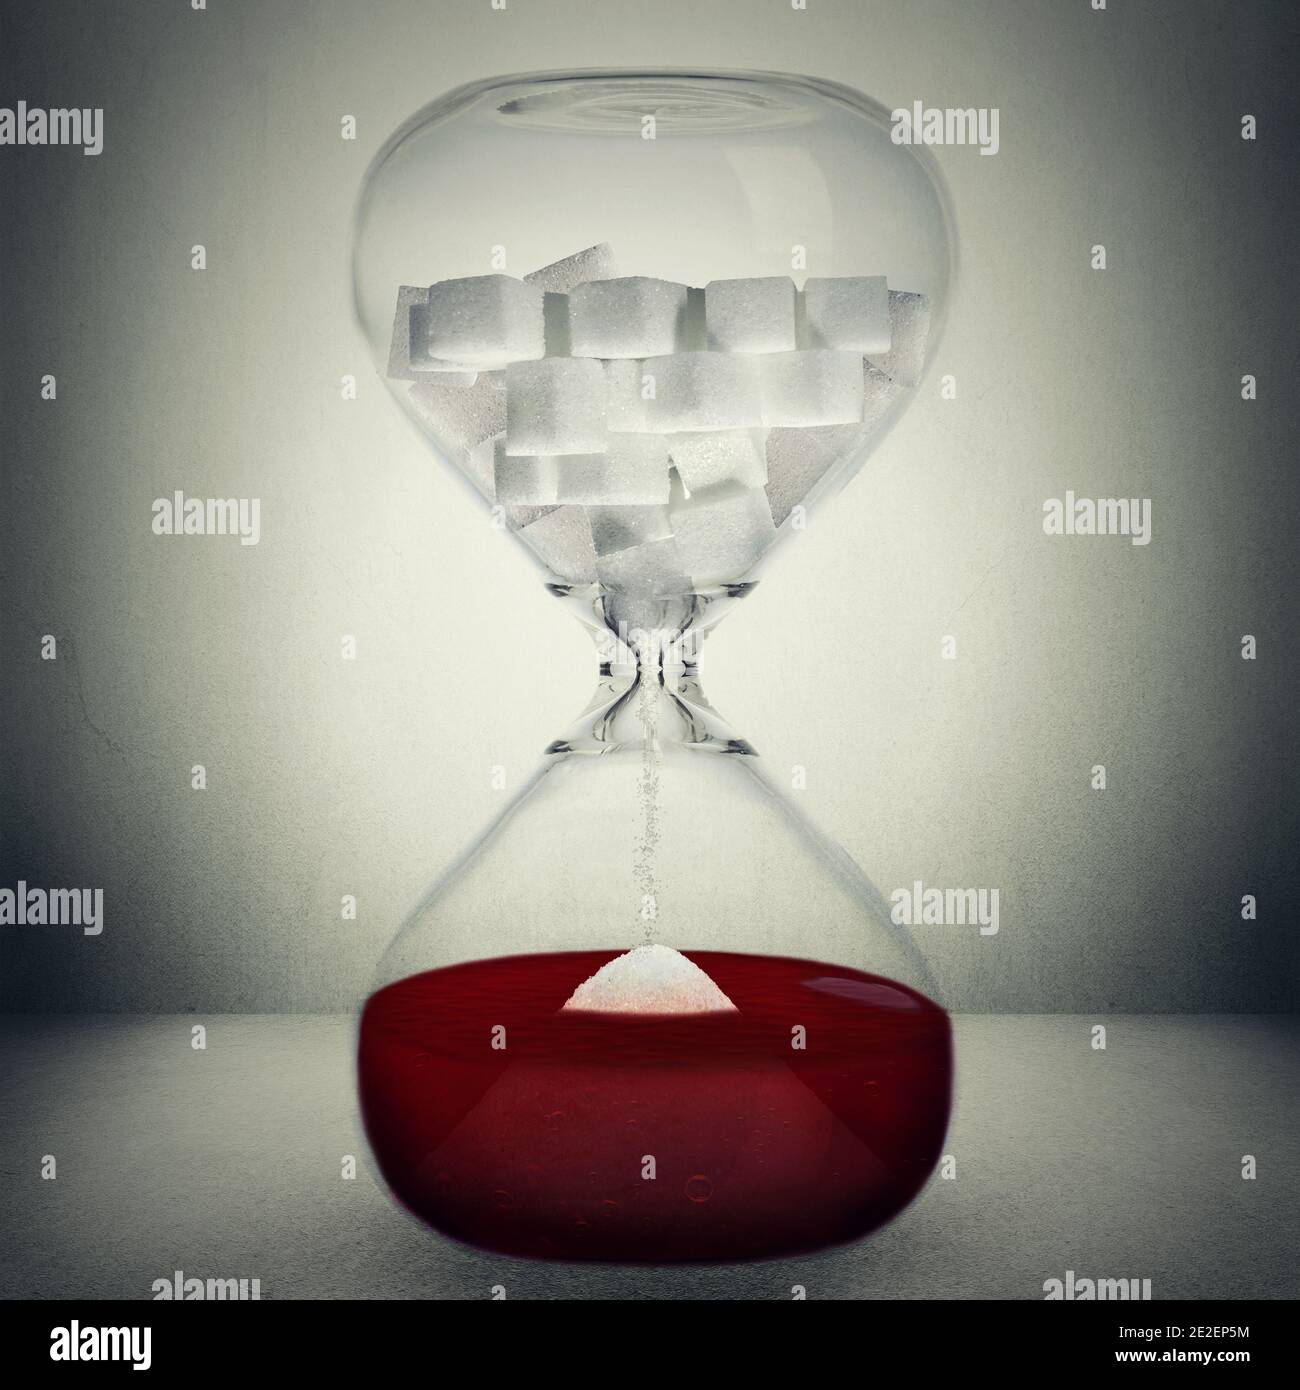 Sugar kills your blood and body in time concept isolated on grey background. Closeup of a Hourglass with sugar in cubes that are pouring down into sug Stock Photo